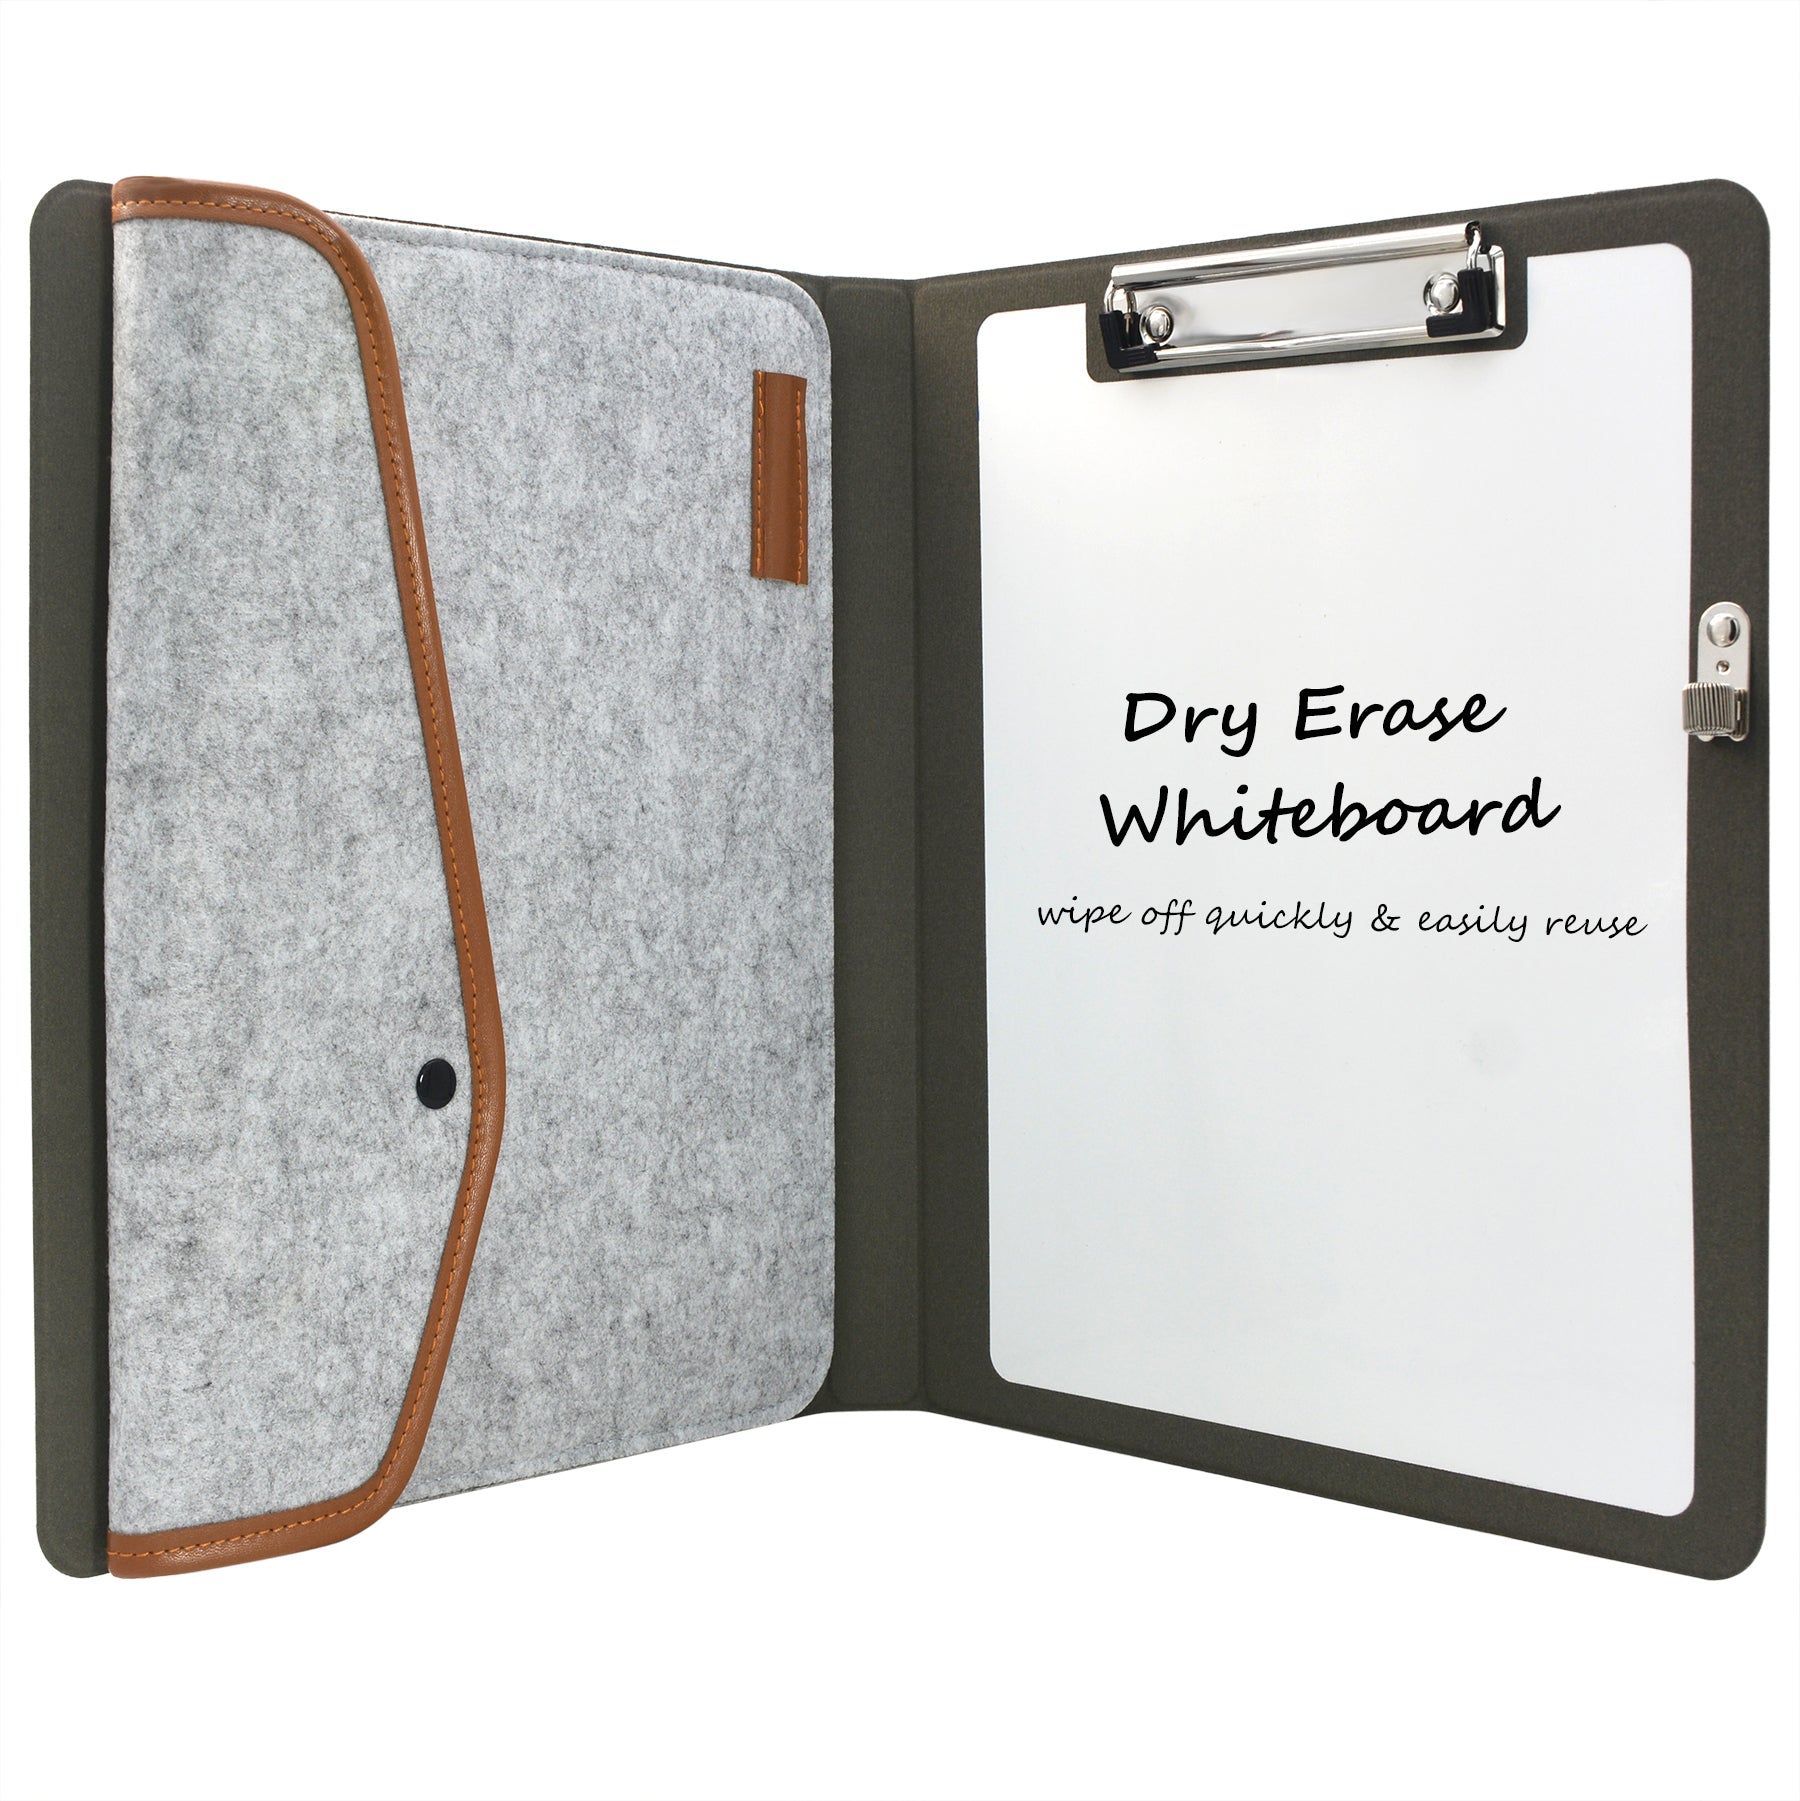 Padfolio Case with Whiteboard Clipboard and Document Pocket, Business –  epadfolios